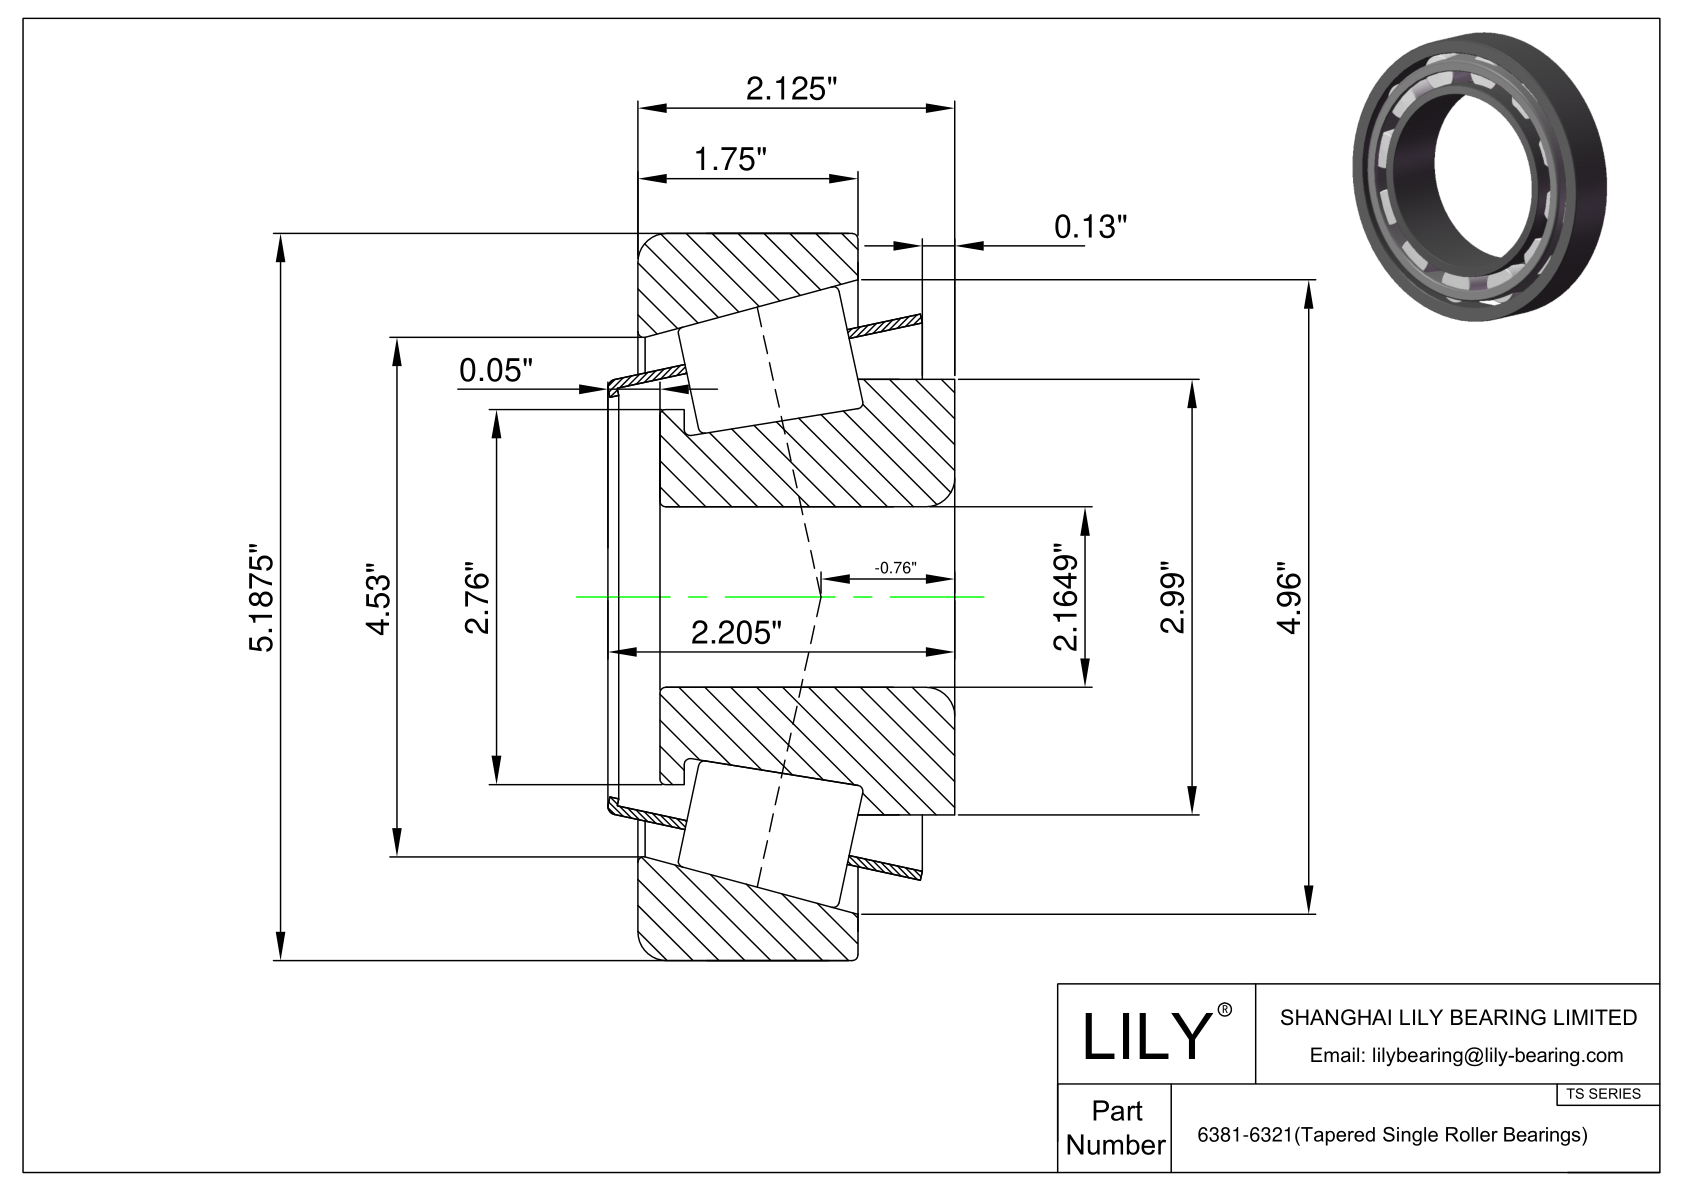 6381-6321 TS (Tapered Single Roller Bearings) (Imperial) cad drawing